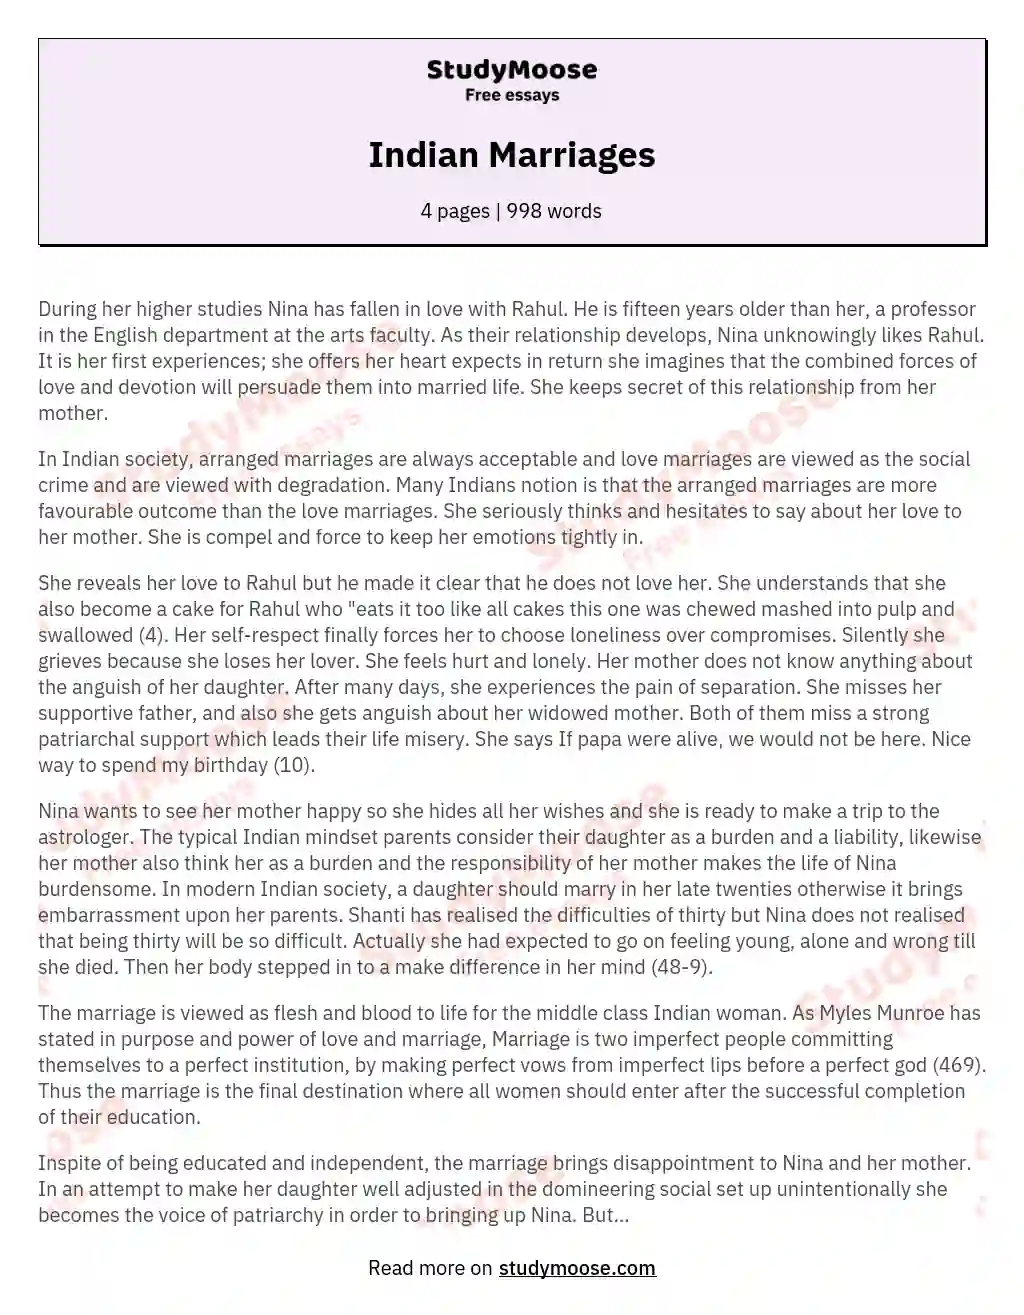 Indian Marriages essay